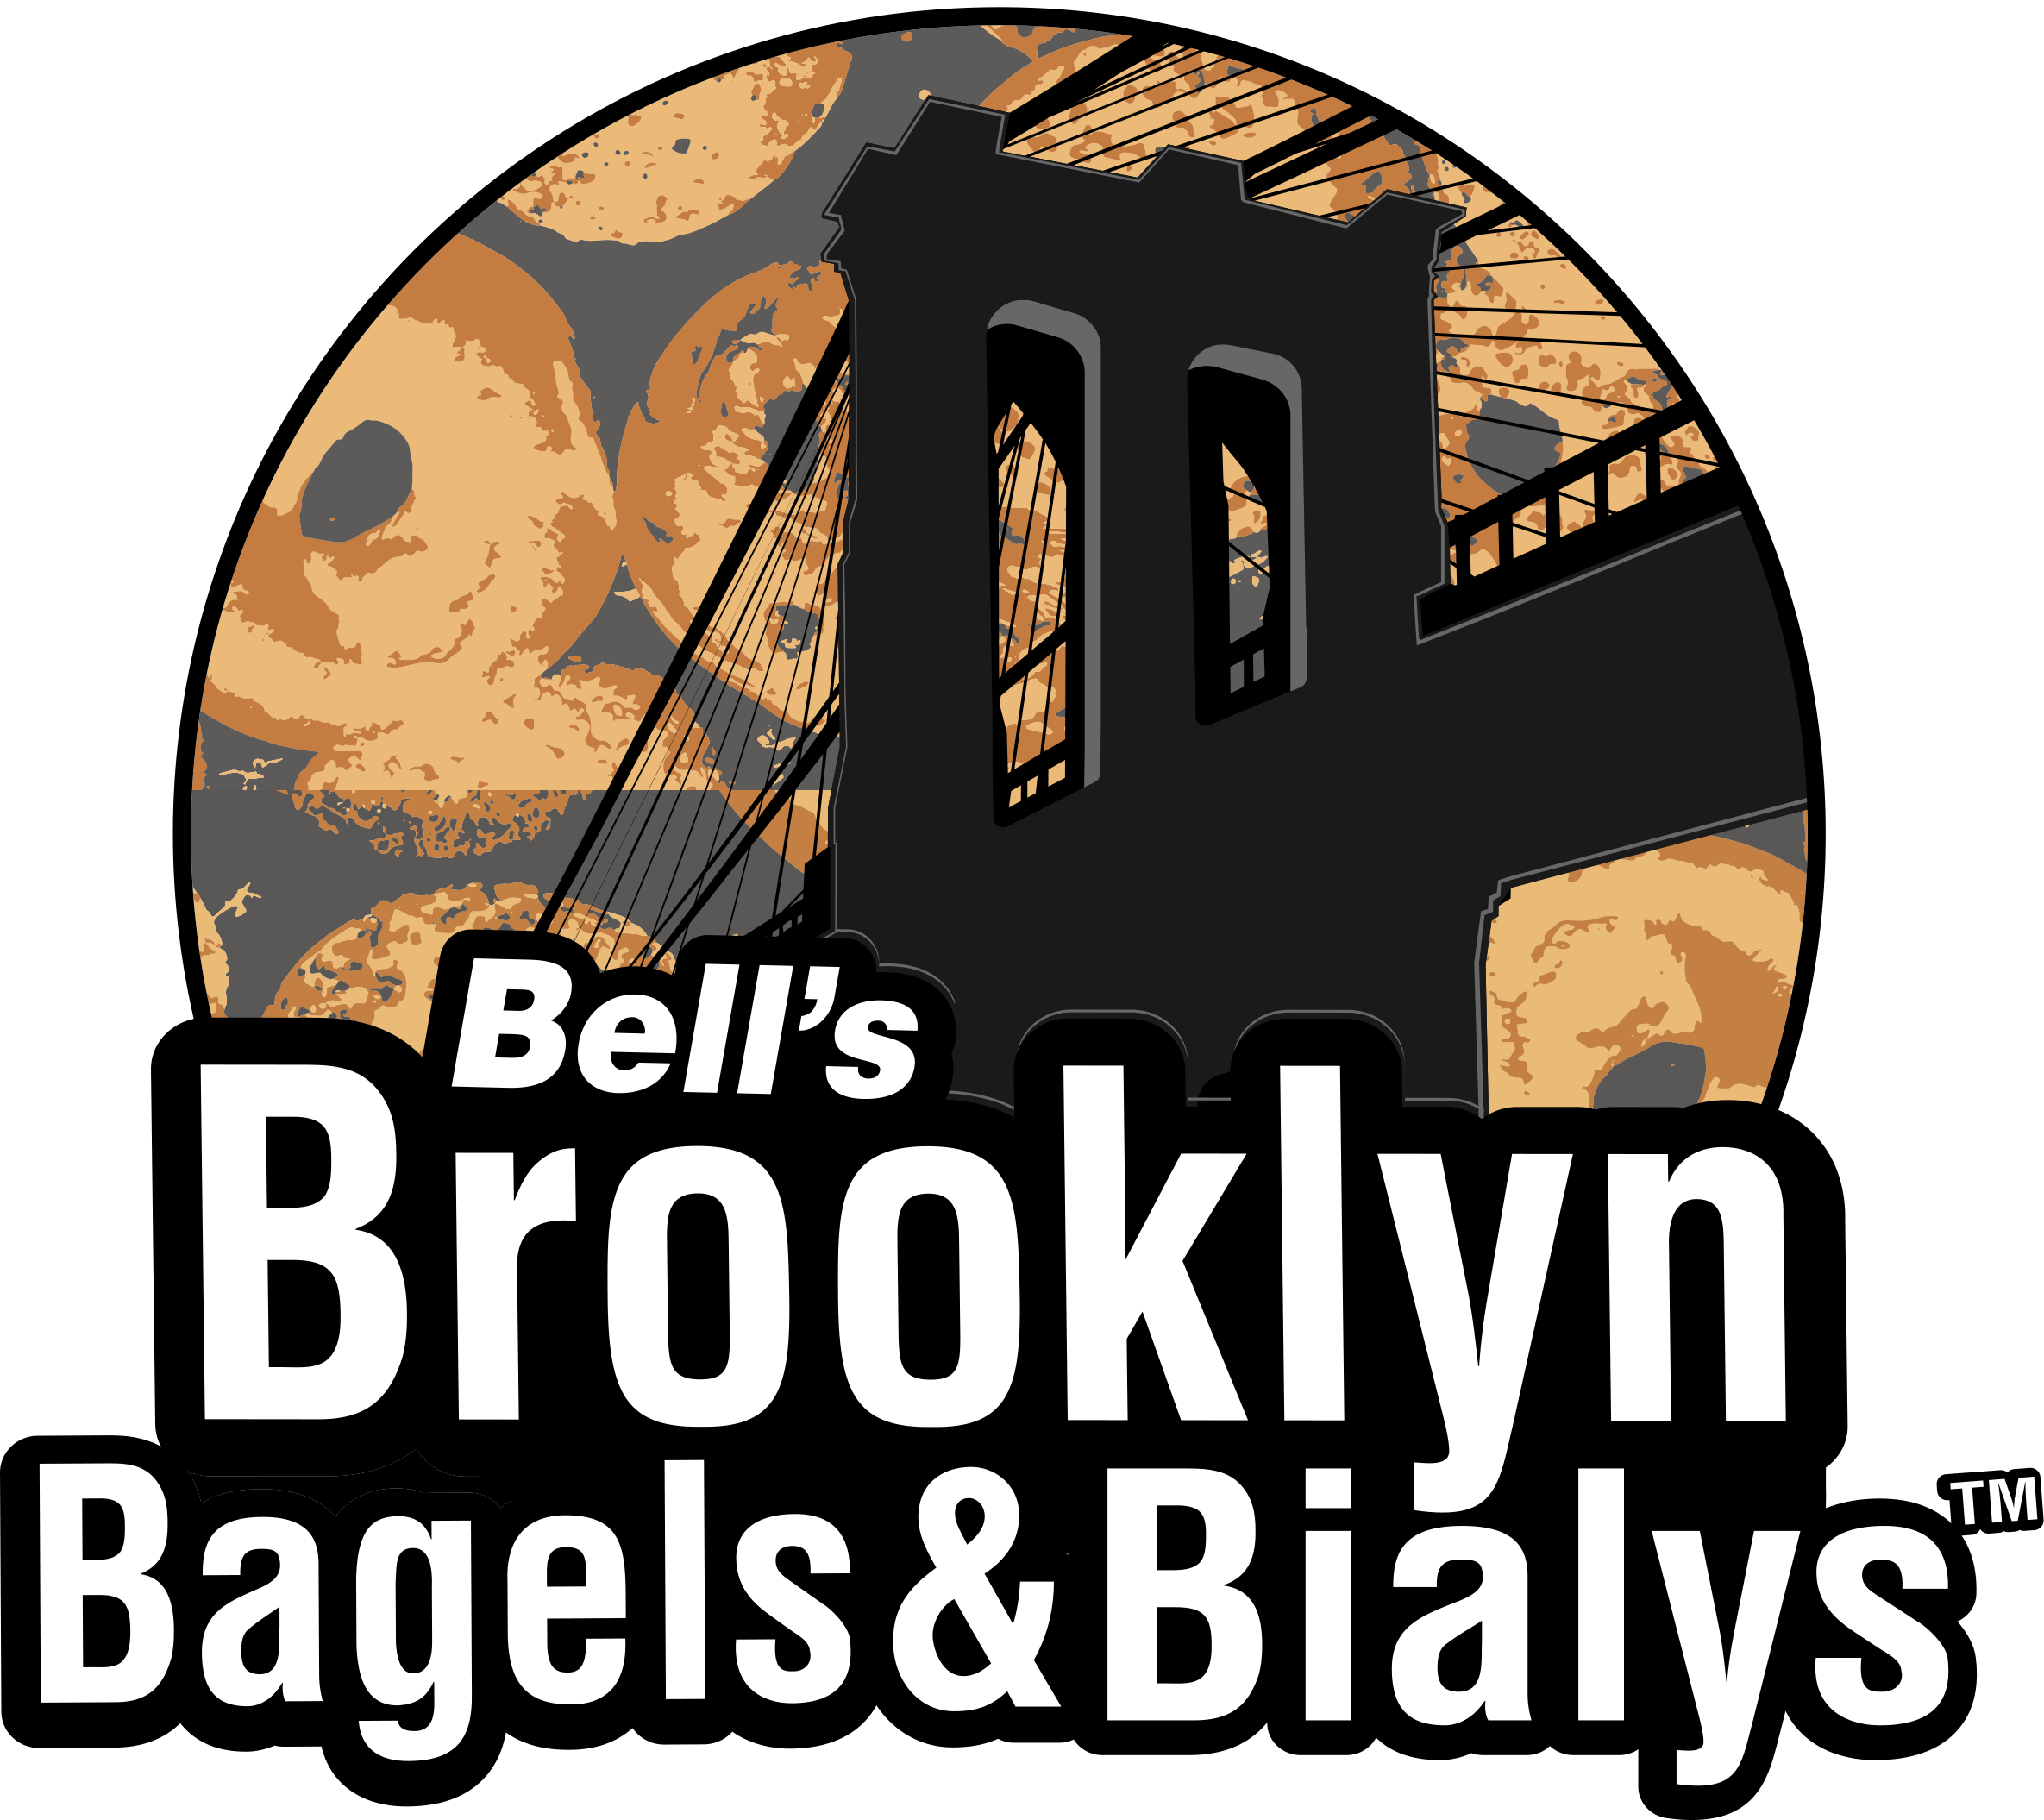 Bagels By Bell